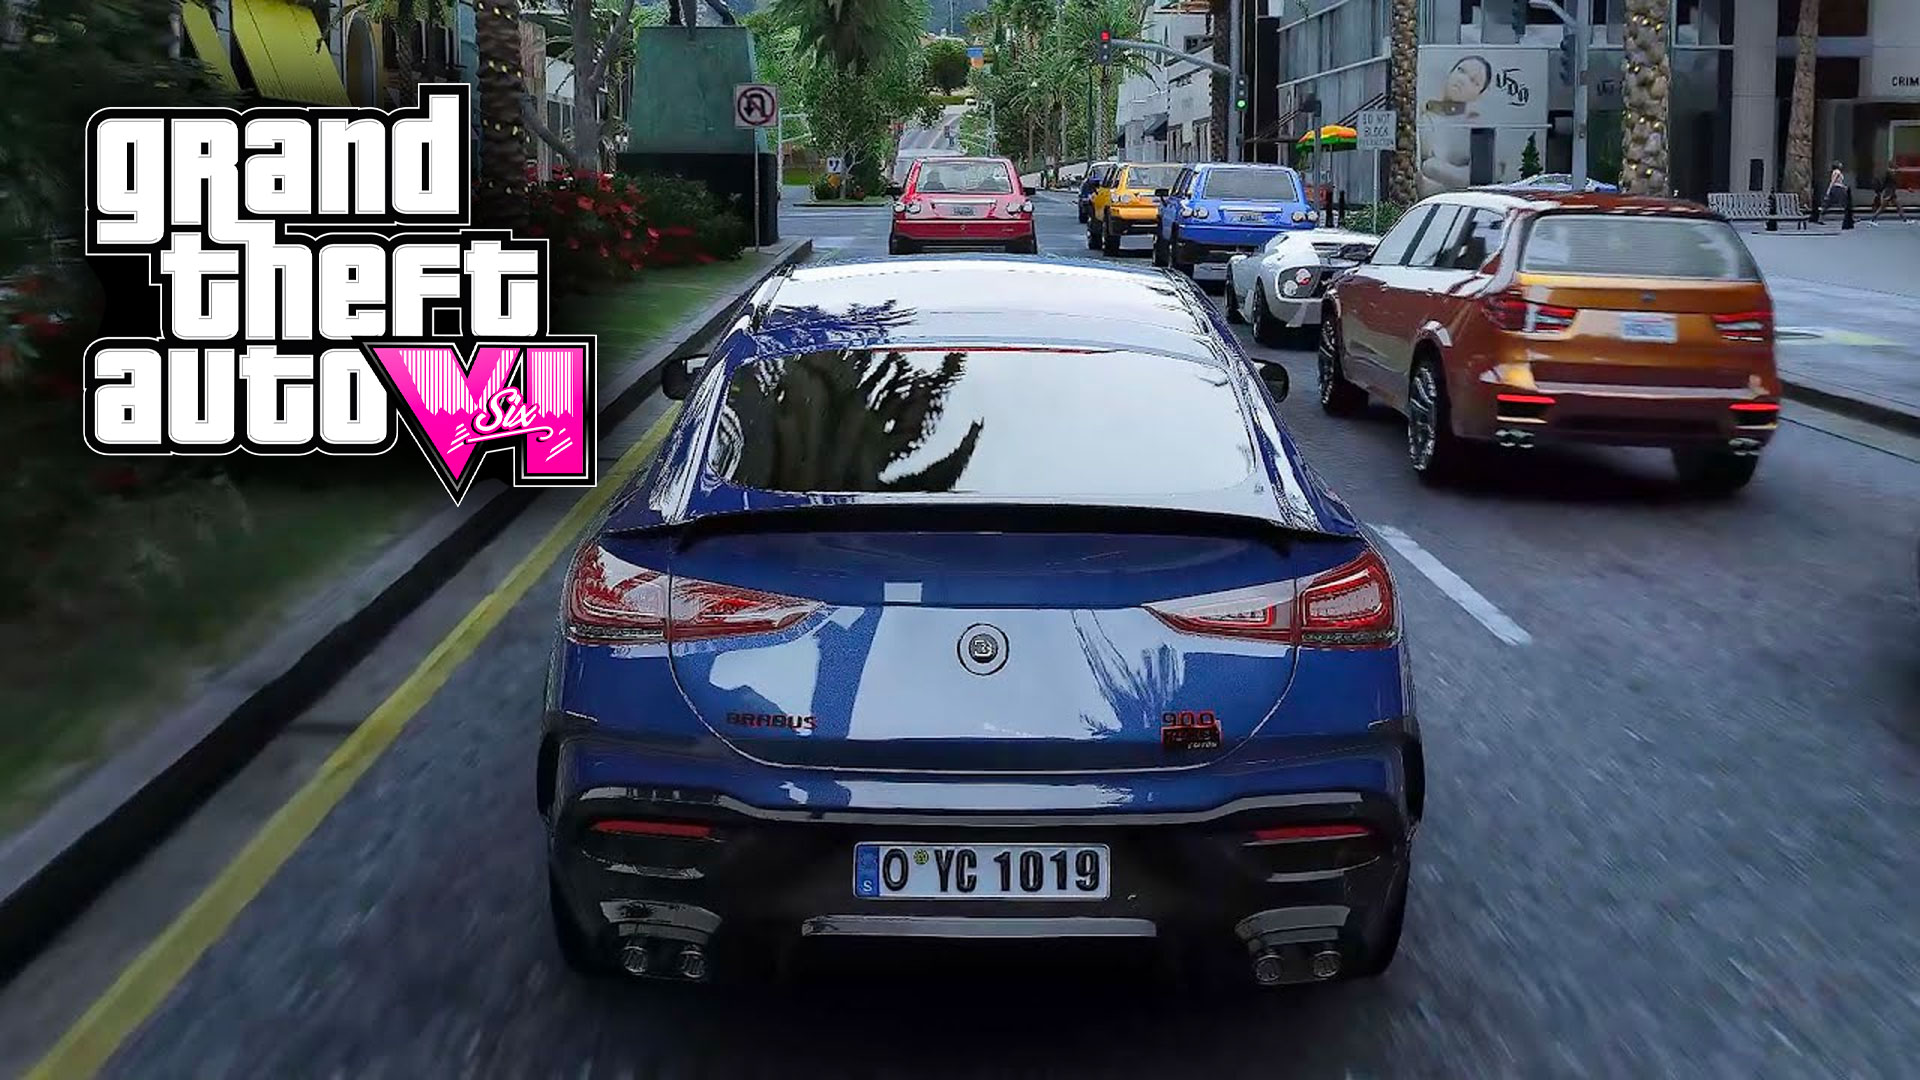 GTA 6 is around the corner: the Rockstar Games studio has received the first official rating for the game
Latest